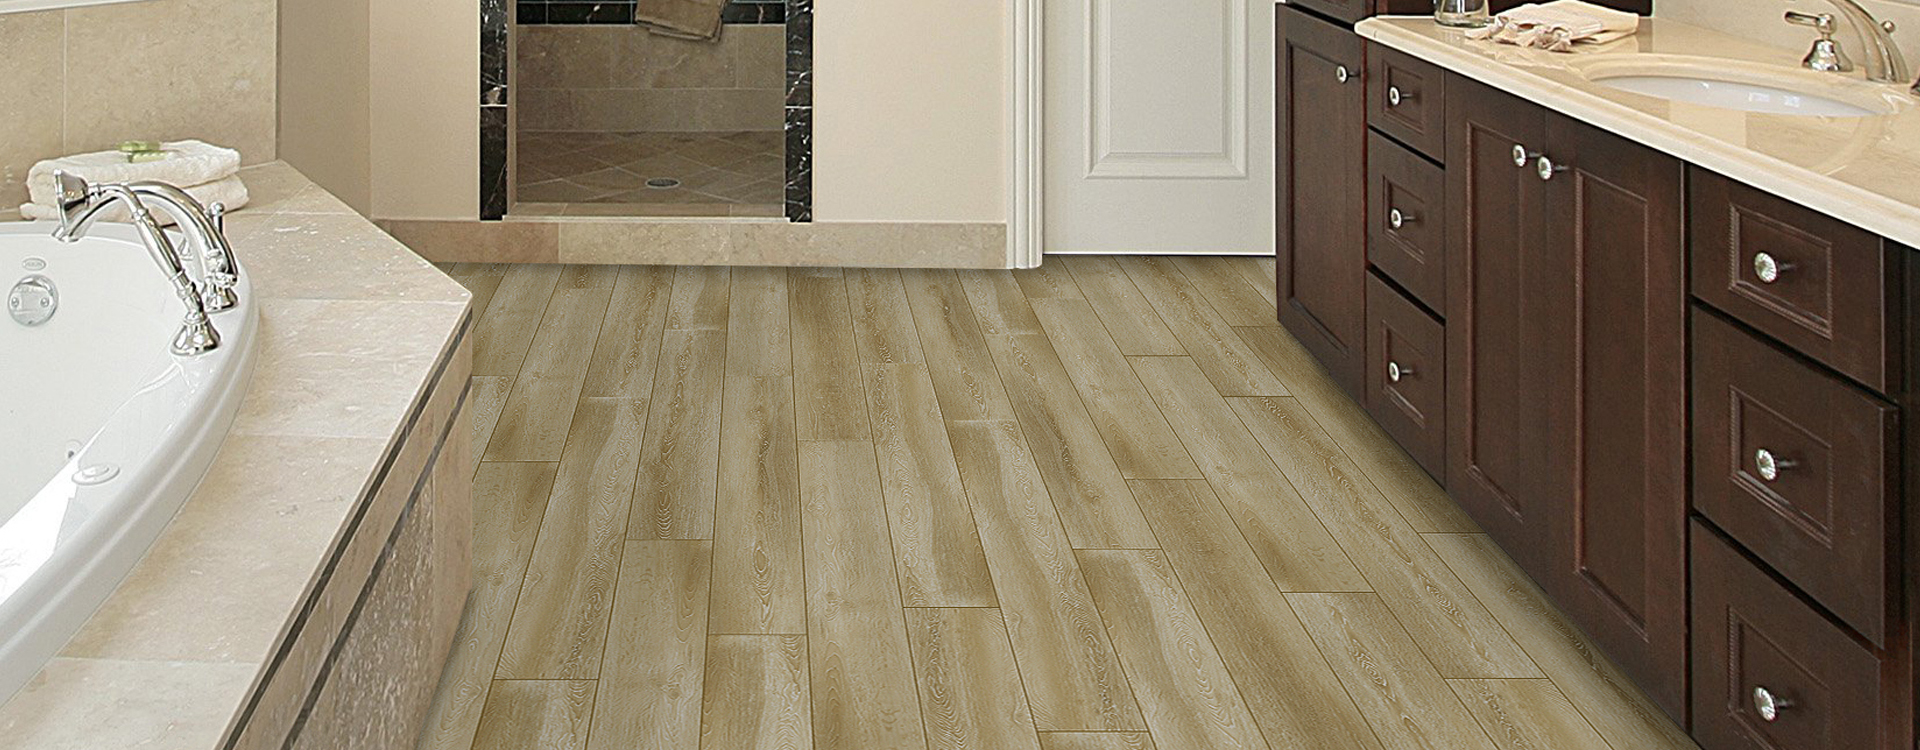 Horizen Flooring presents to you a picture of a quality wide plank Fairhope luxury vinyl plank. NovoCore Q Merengue collection features a wide range of colors & designs that will compliment any interior. Natural wood grain synchronized surface allow for an authentic hardwood look & feel. This collection features a 0.3″ / 7.5 mm overall thickness and a durable 22 mil / 0.55 mm wear layer for residential and commercial applications.